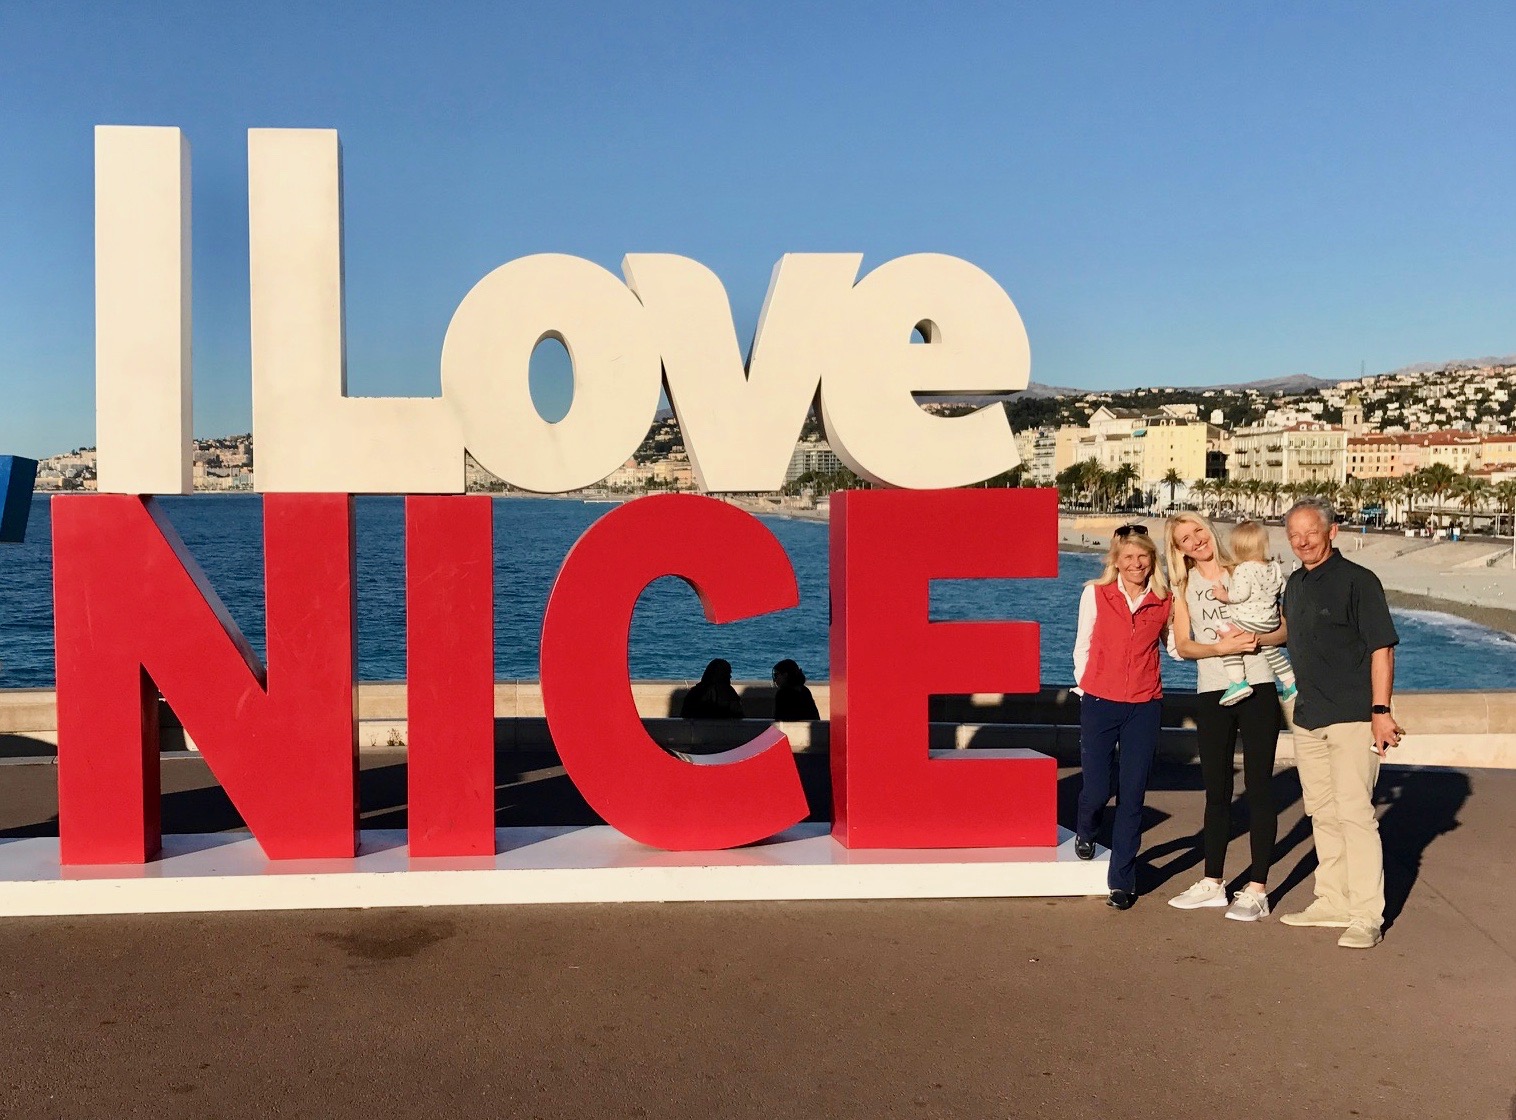 Our last night in Nice!